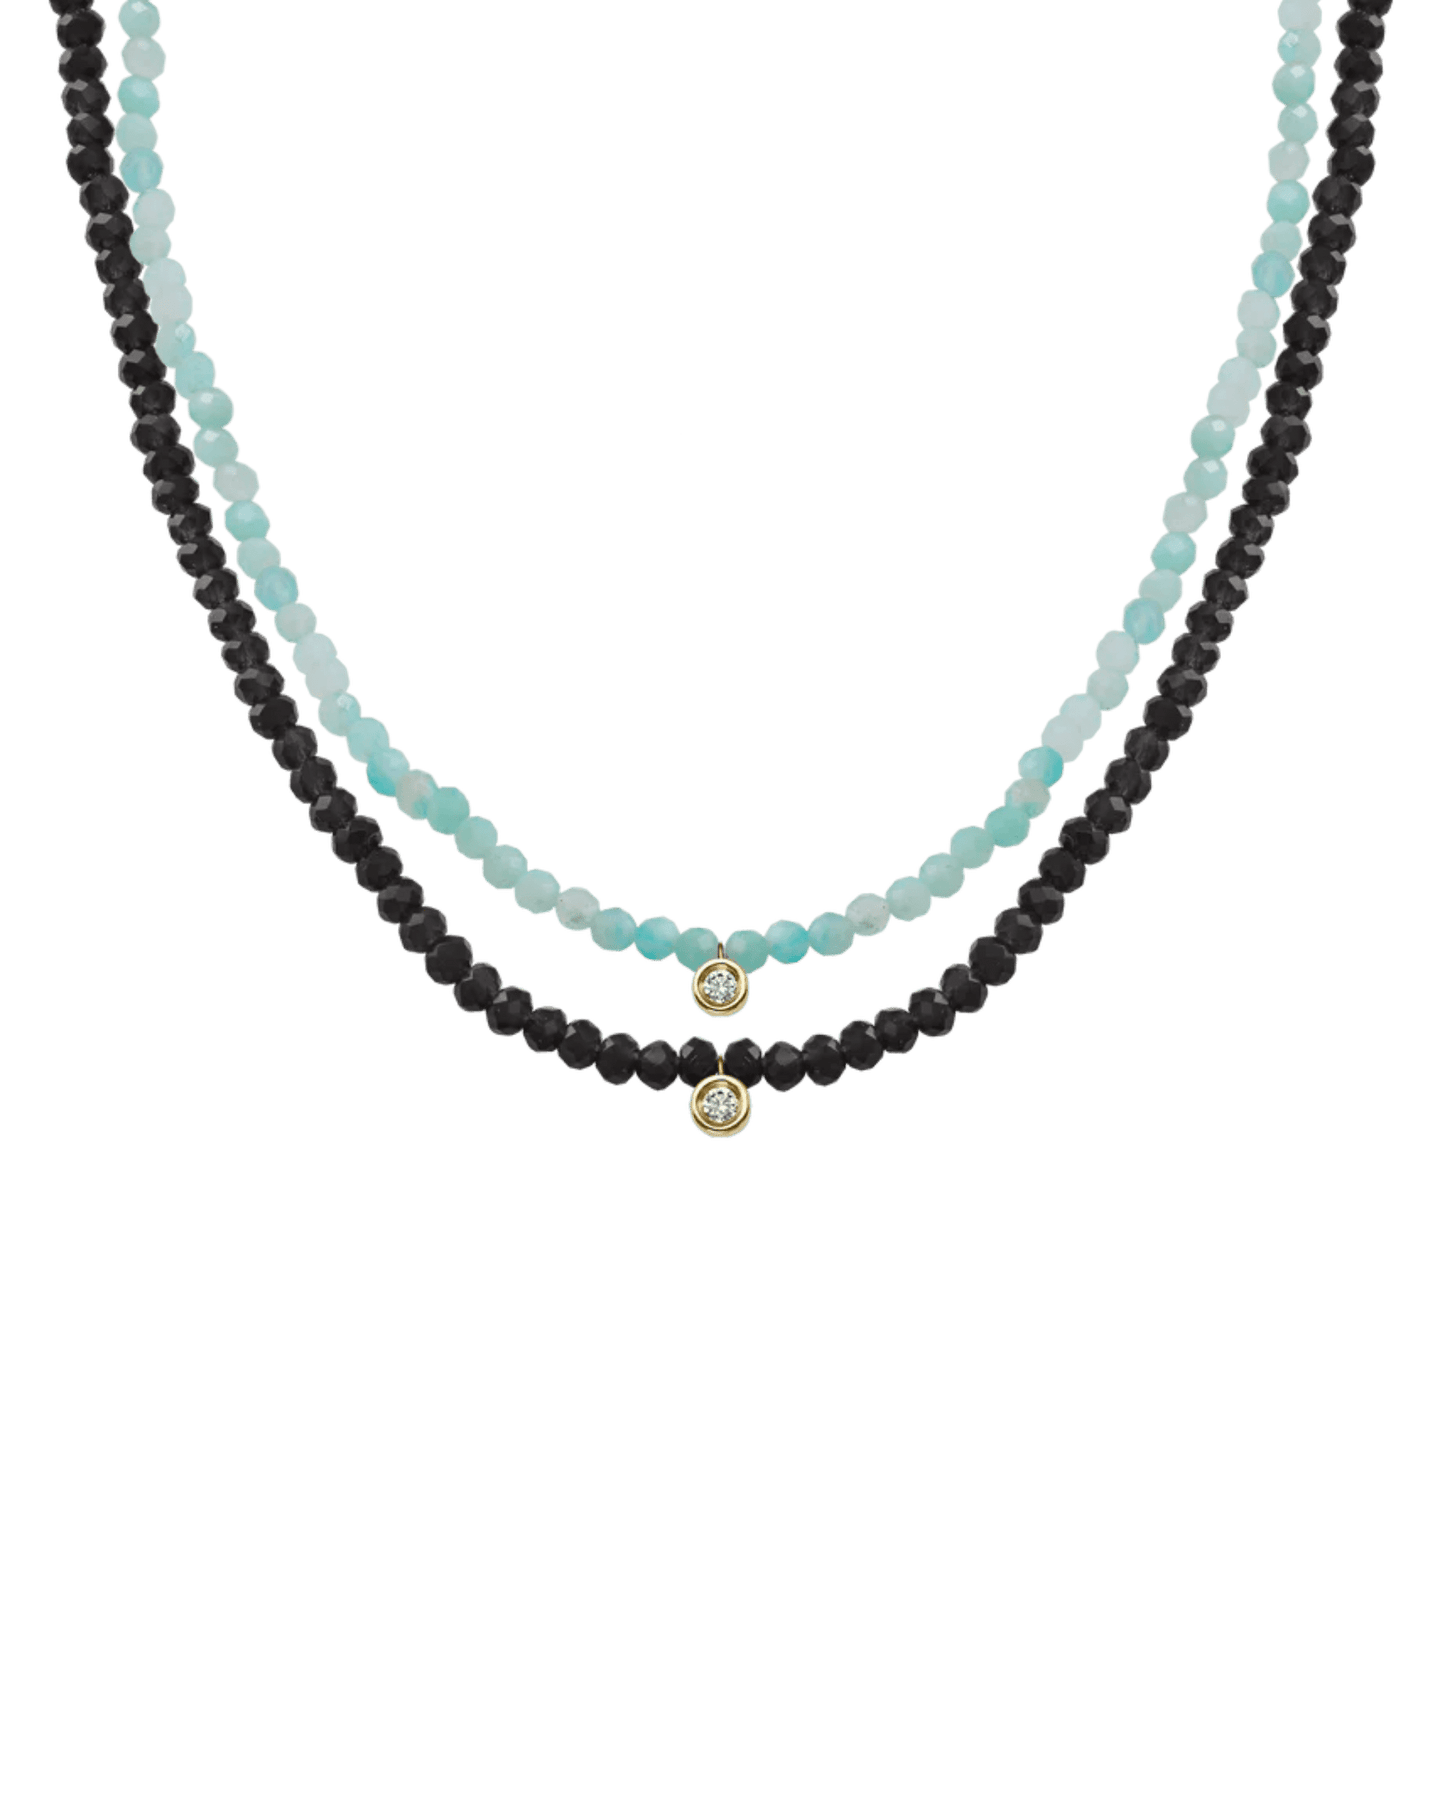 Set of Gemstone & Diamond Necklaces - 14K Yellow Gold Necklaces magal-dev Glass Beads Black Spinnel Small 0.03ct 